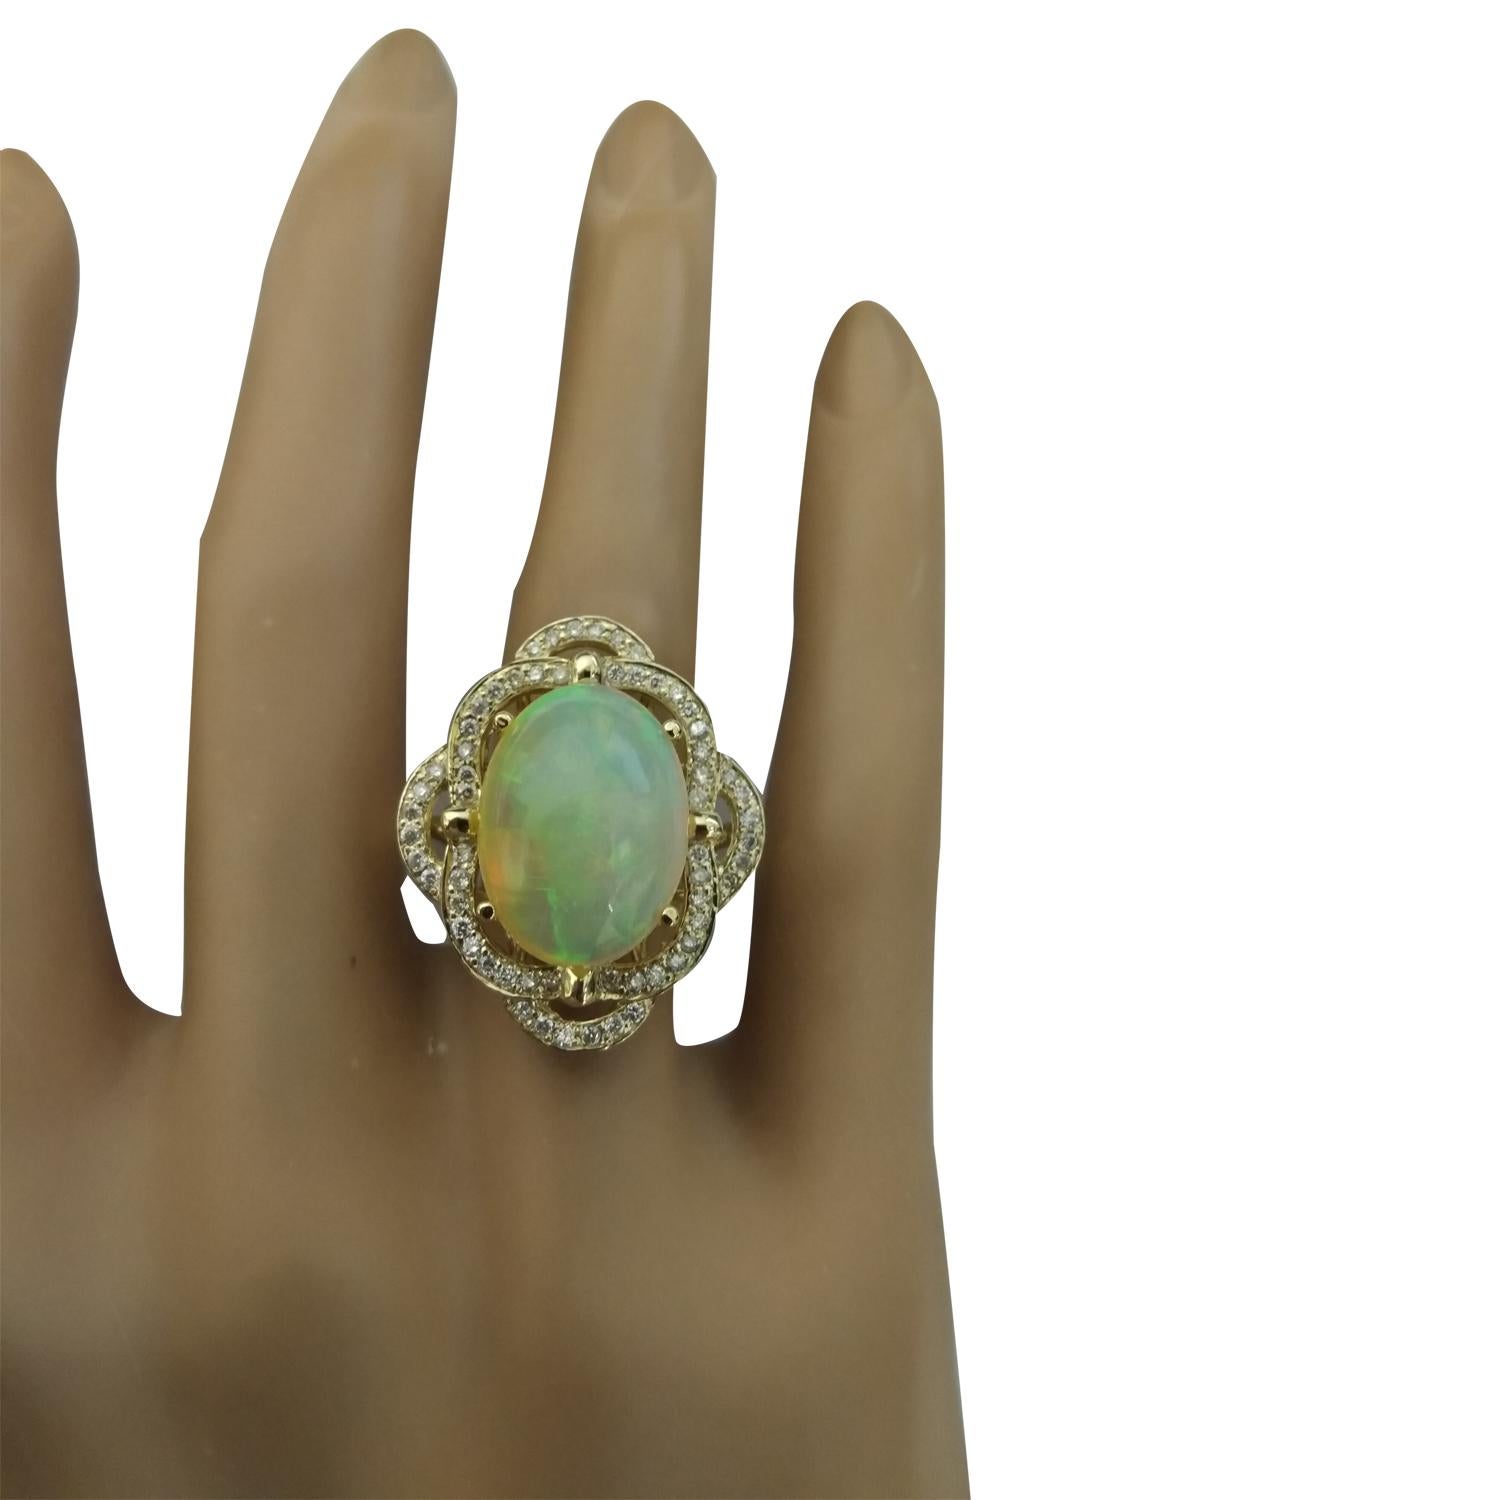 7.05 Carat Natural Opal 14 Karat Solid Yellow Gold Diamond Ring
Stamped: 14K 
Total Ring Weight: 7 Grams 
Opal Weight 6.55 Carat (16.00x12.00 Millimeters)
Diamond Weight: 0.50 carat (F-G Color, VS2-SI1 Clarity ) 
Face Measures: 25.40x21.55